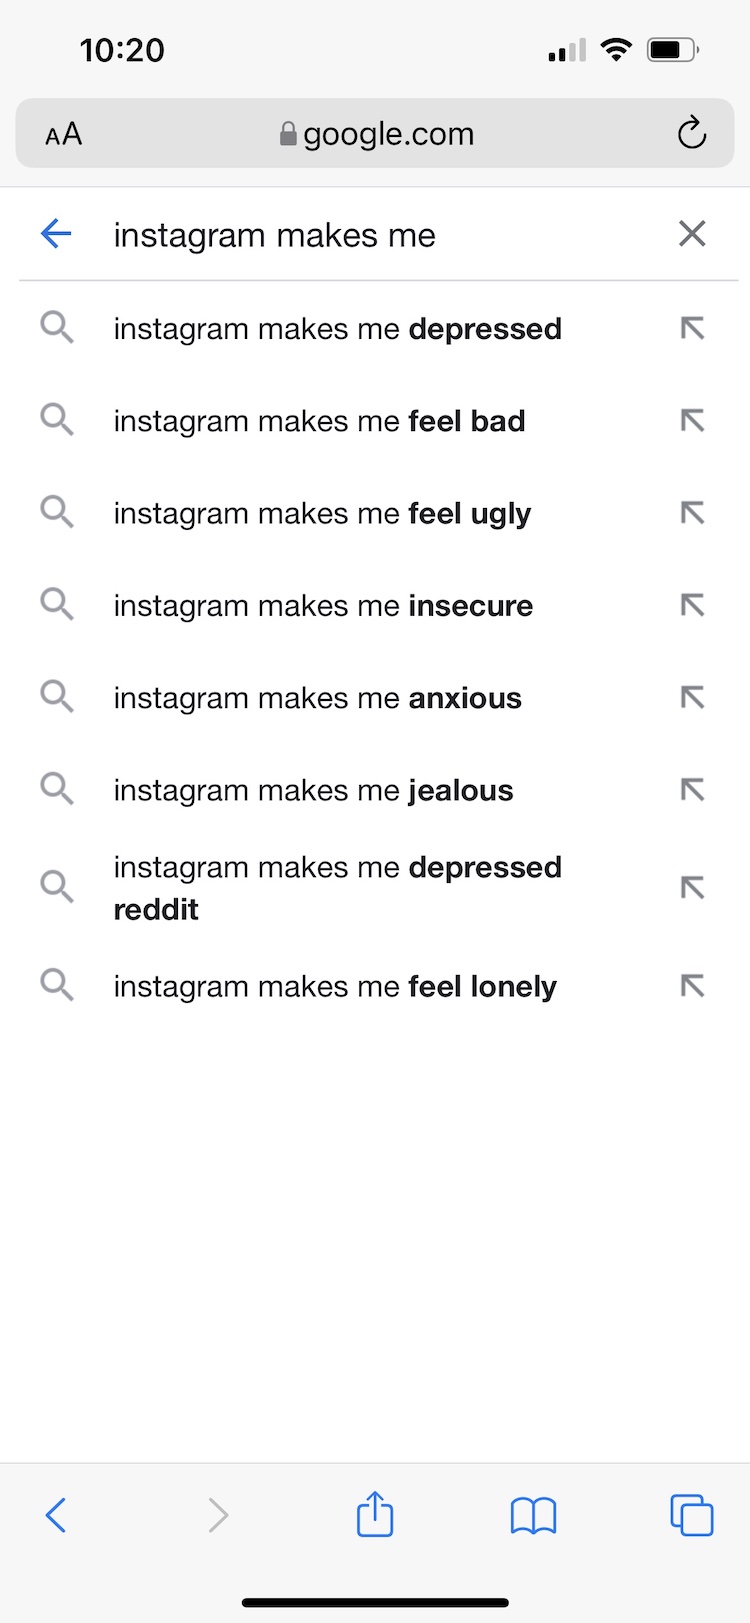 Screenshot of a Google search showing autocompletes related to Instagram.